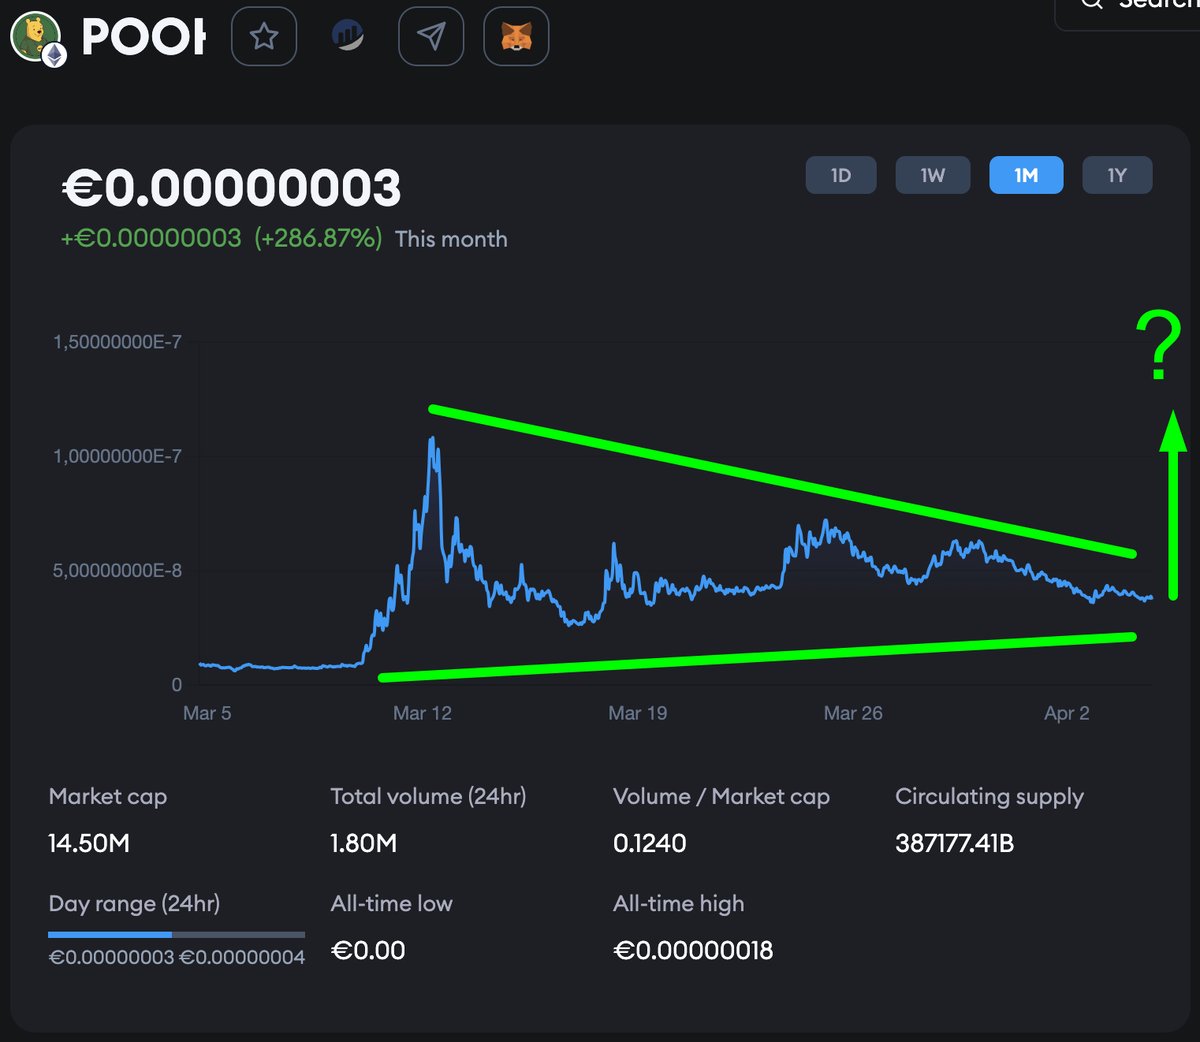 What does this look like?
Could it possibly....?

#pooh $POOH @poohmoneyHQ #memecoin #altcoin #cartooncoin #consolidation #buildup #readytogo #poohcrew